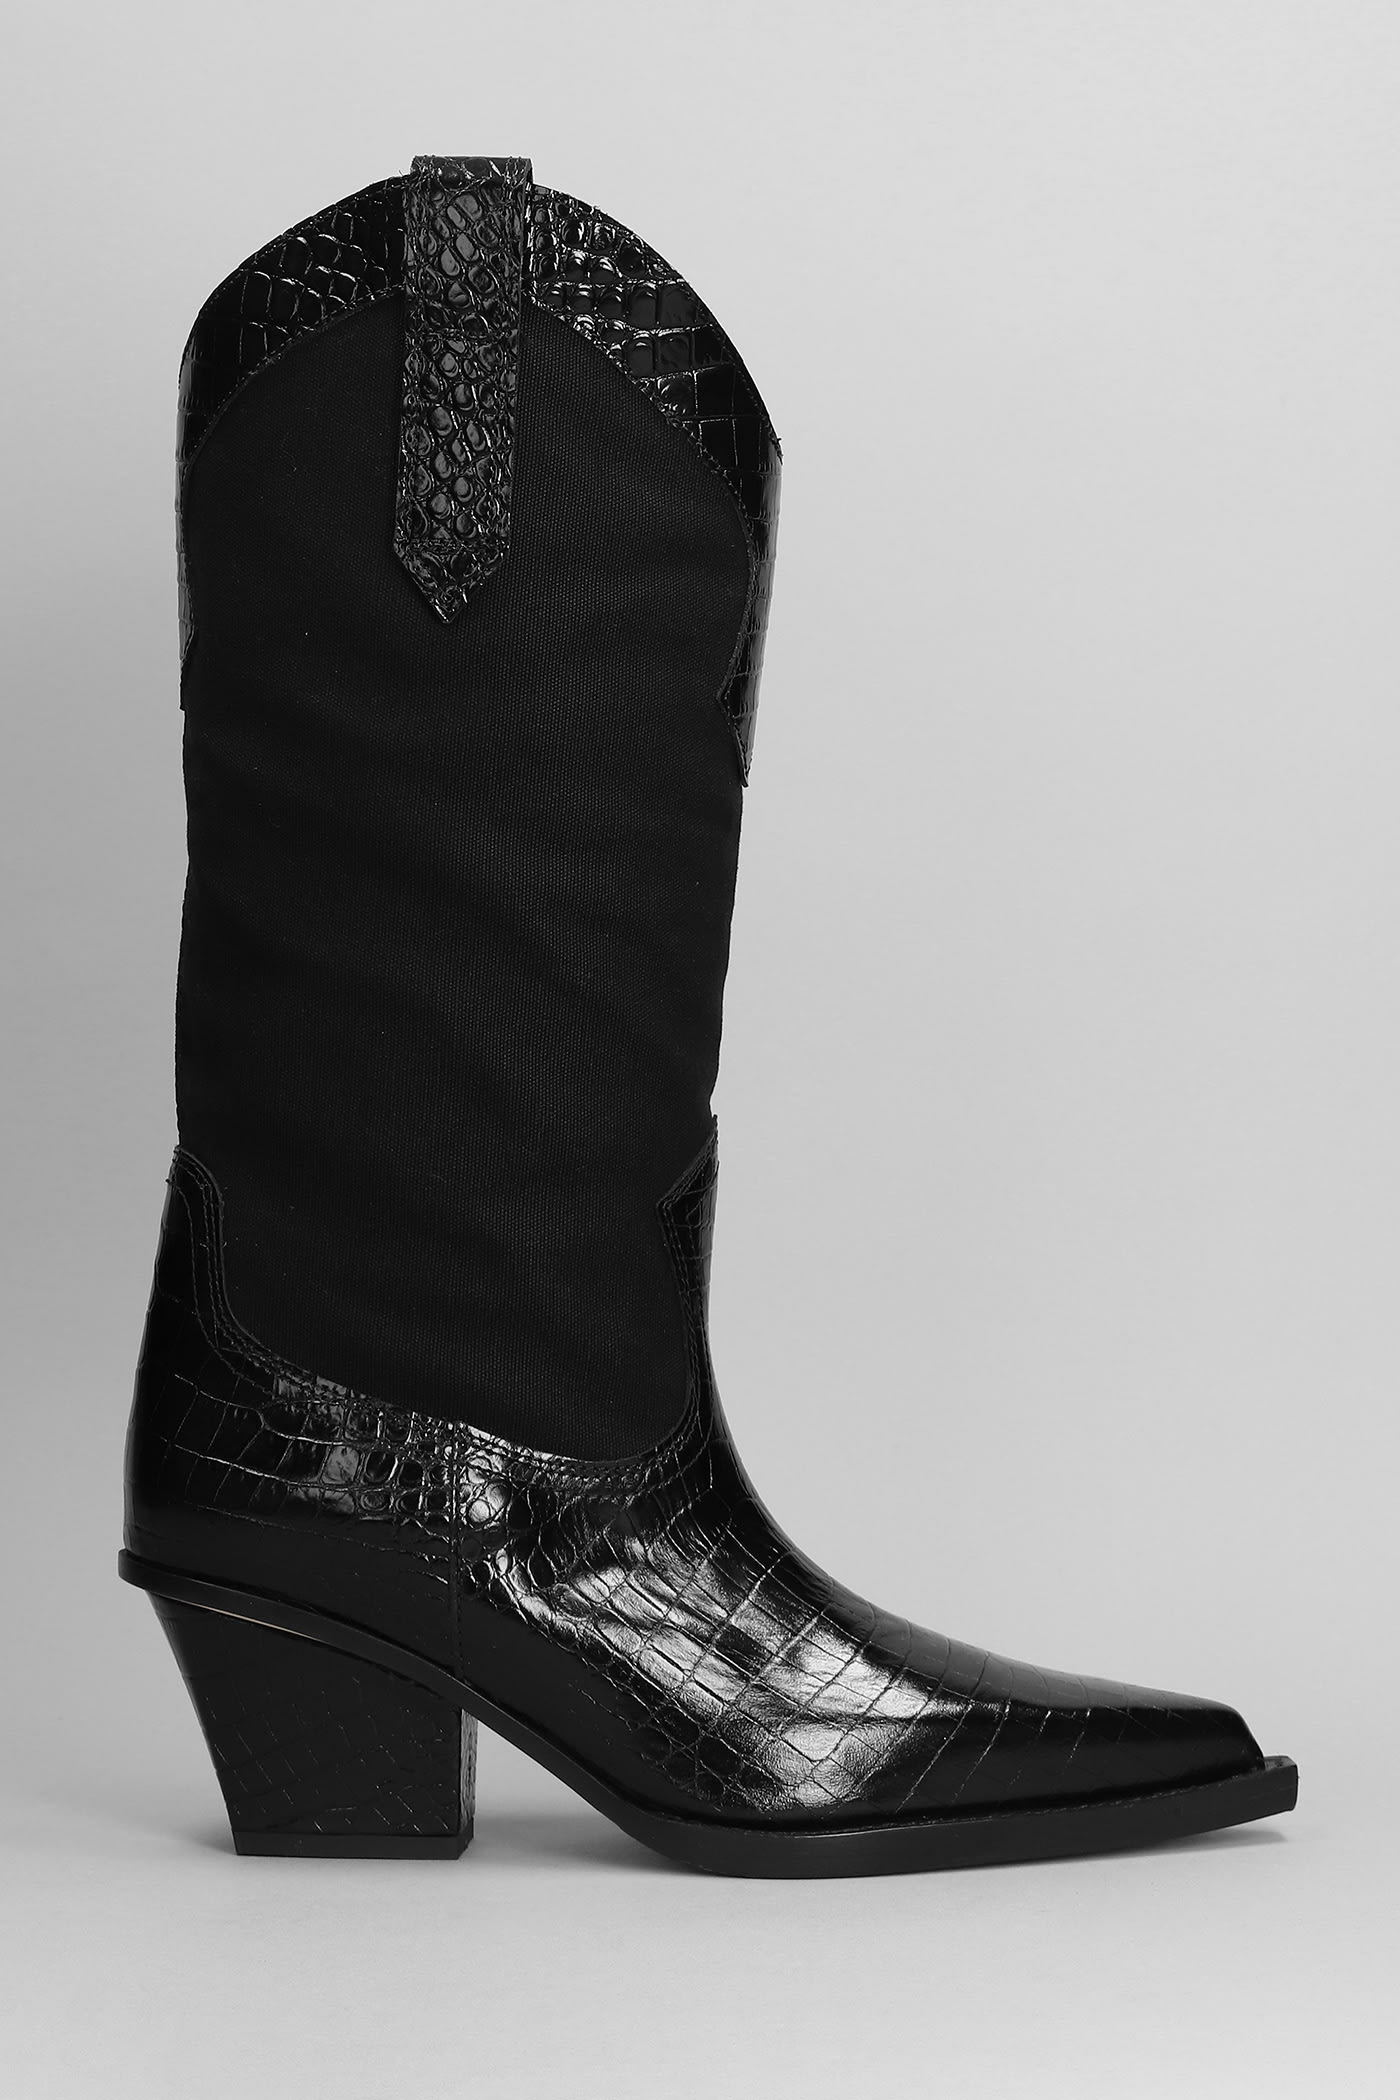 Paris Texas Rosario Texan Boots In Black Leather And Fabric